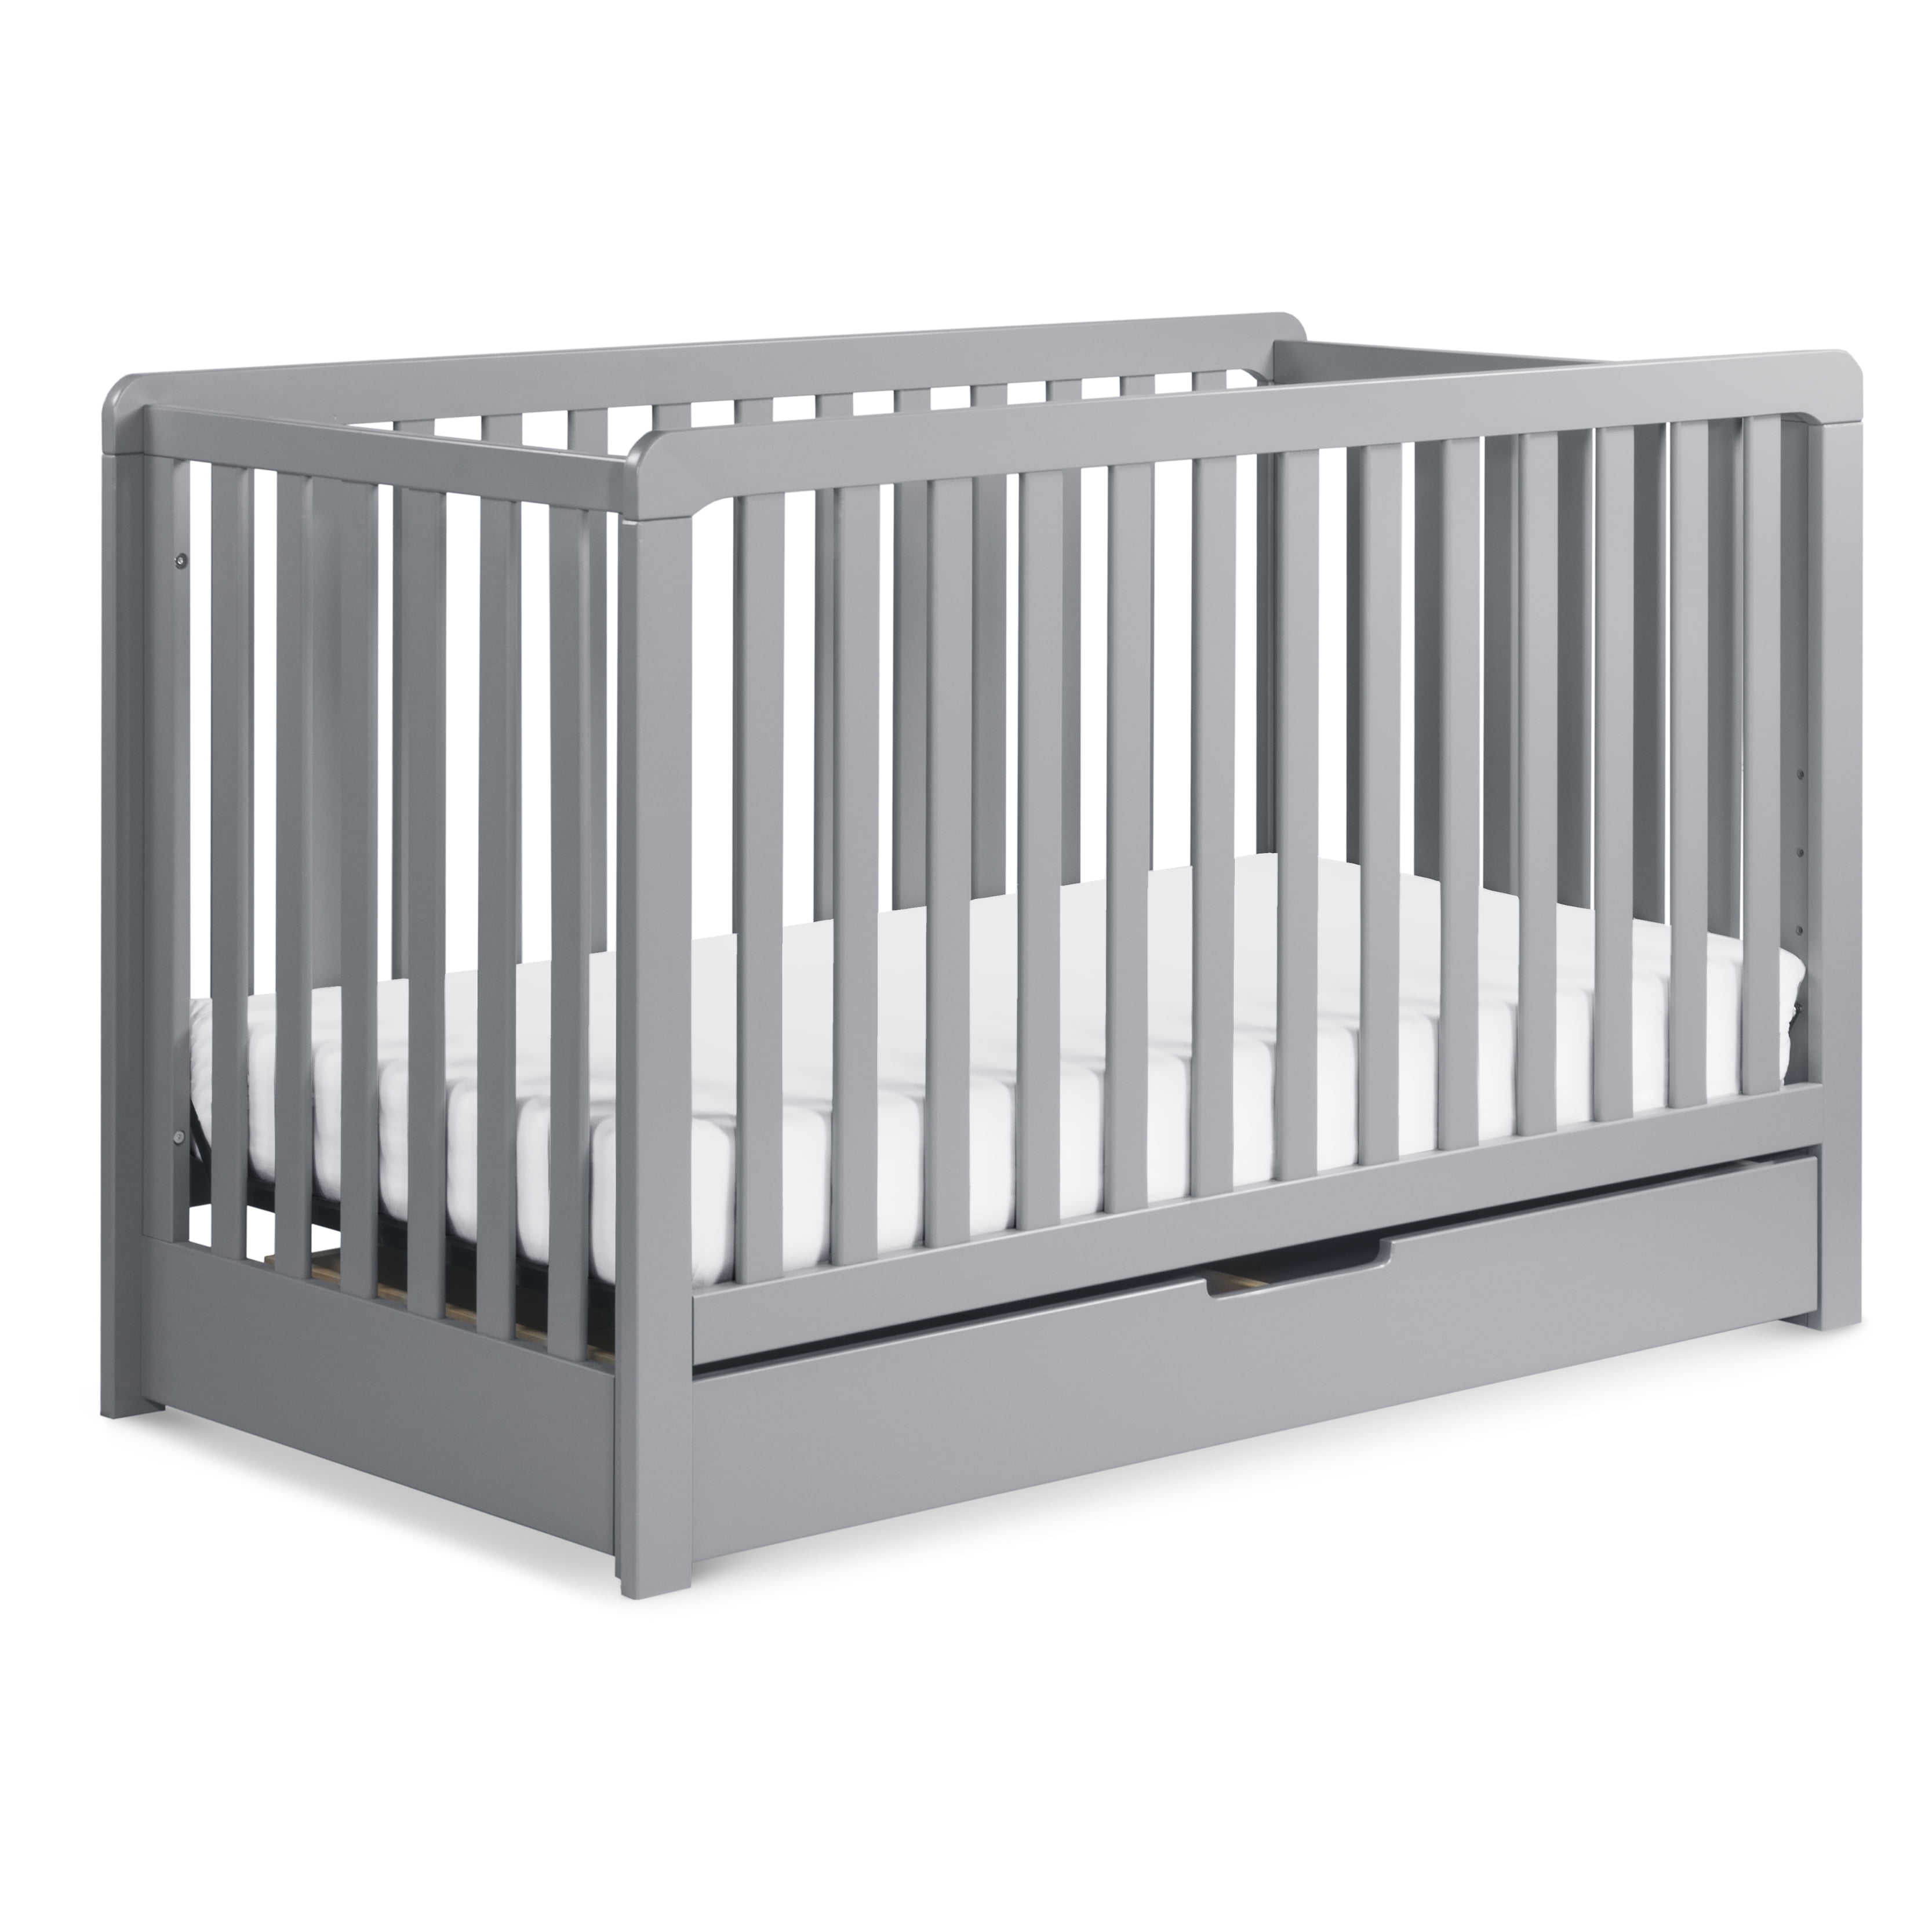 Carter's by DaVinci Colby 4in1 Convertible Crib with Trundle Drawer in Gray